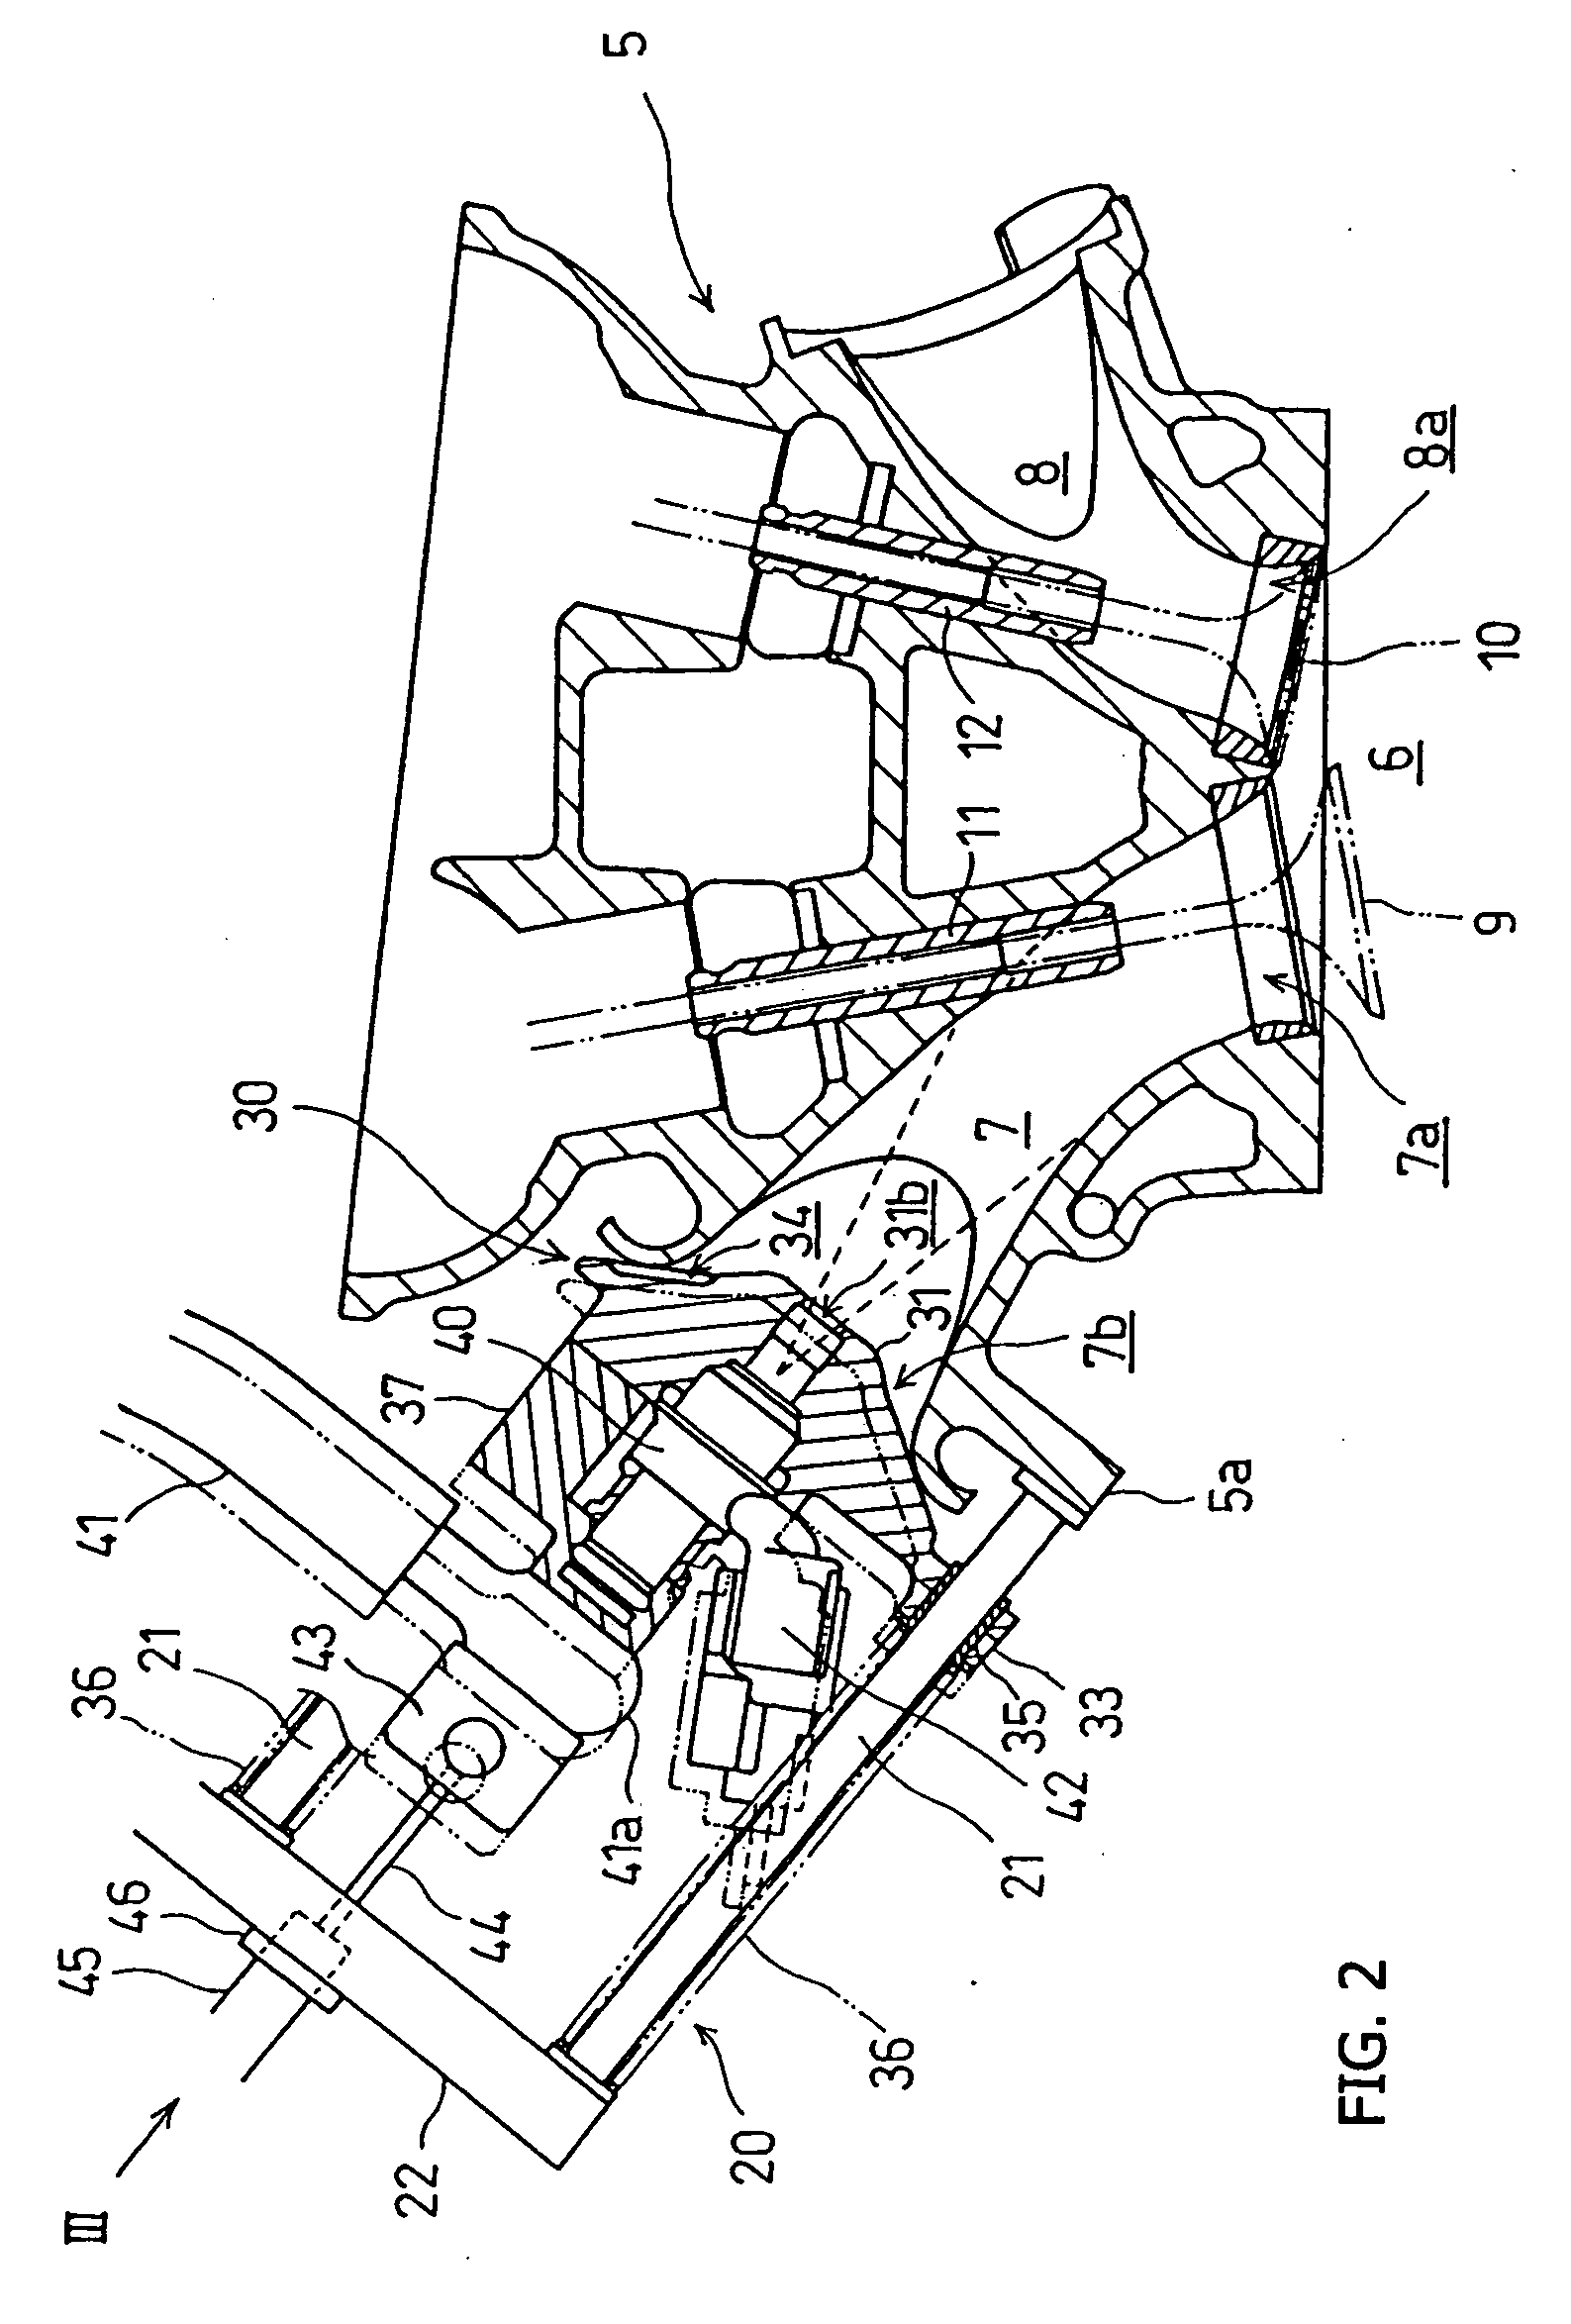 Intake flow control apparatus for an internal combustion engine